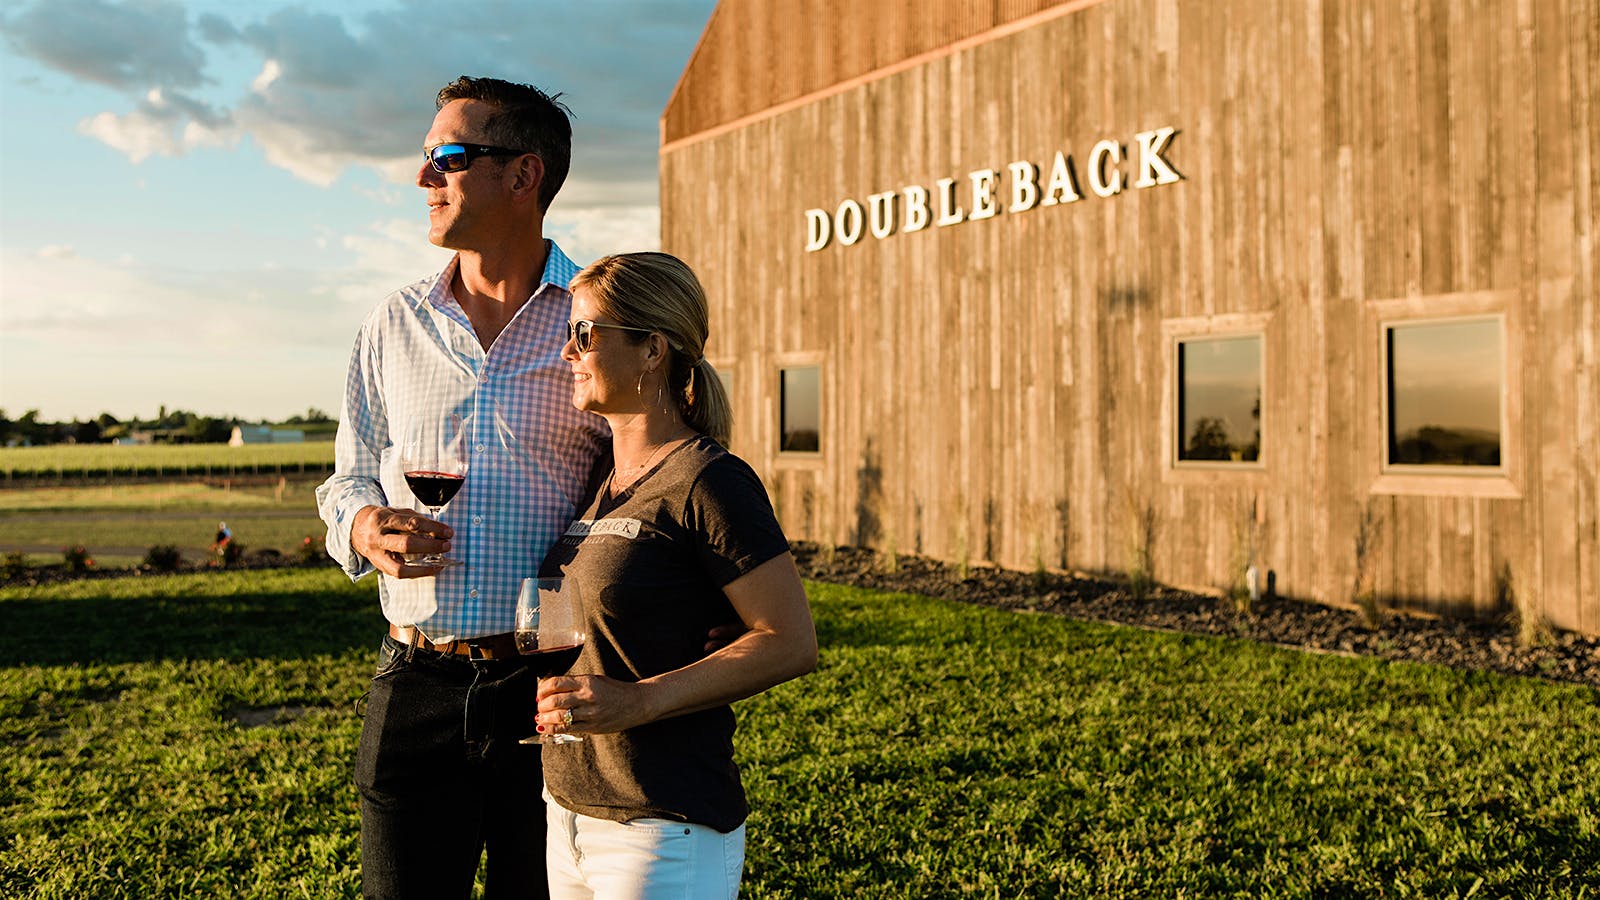 In the Red Zone: Drew Bledsoe Builds New Walla Walla Winery